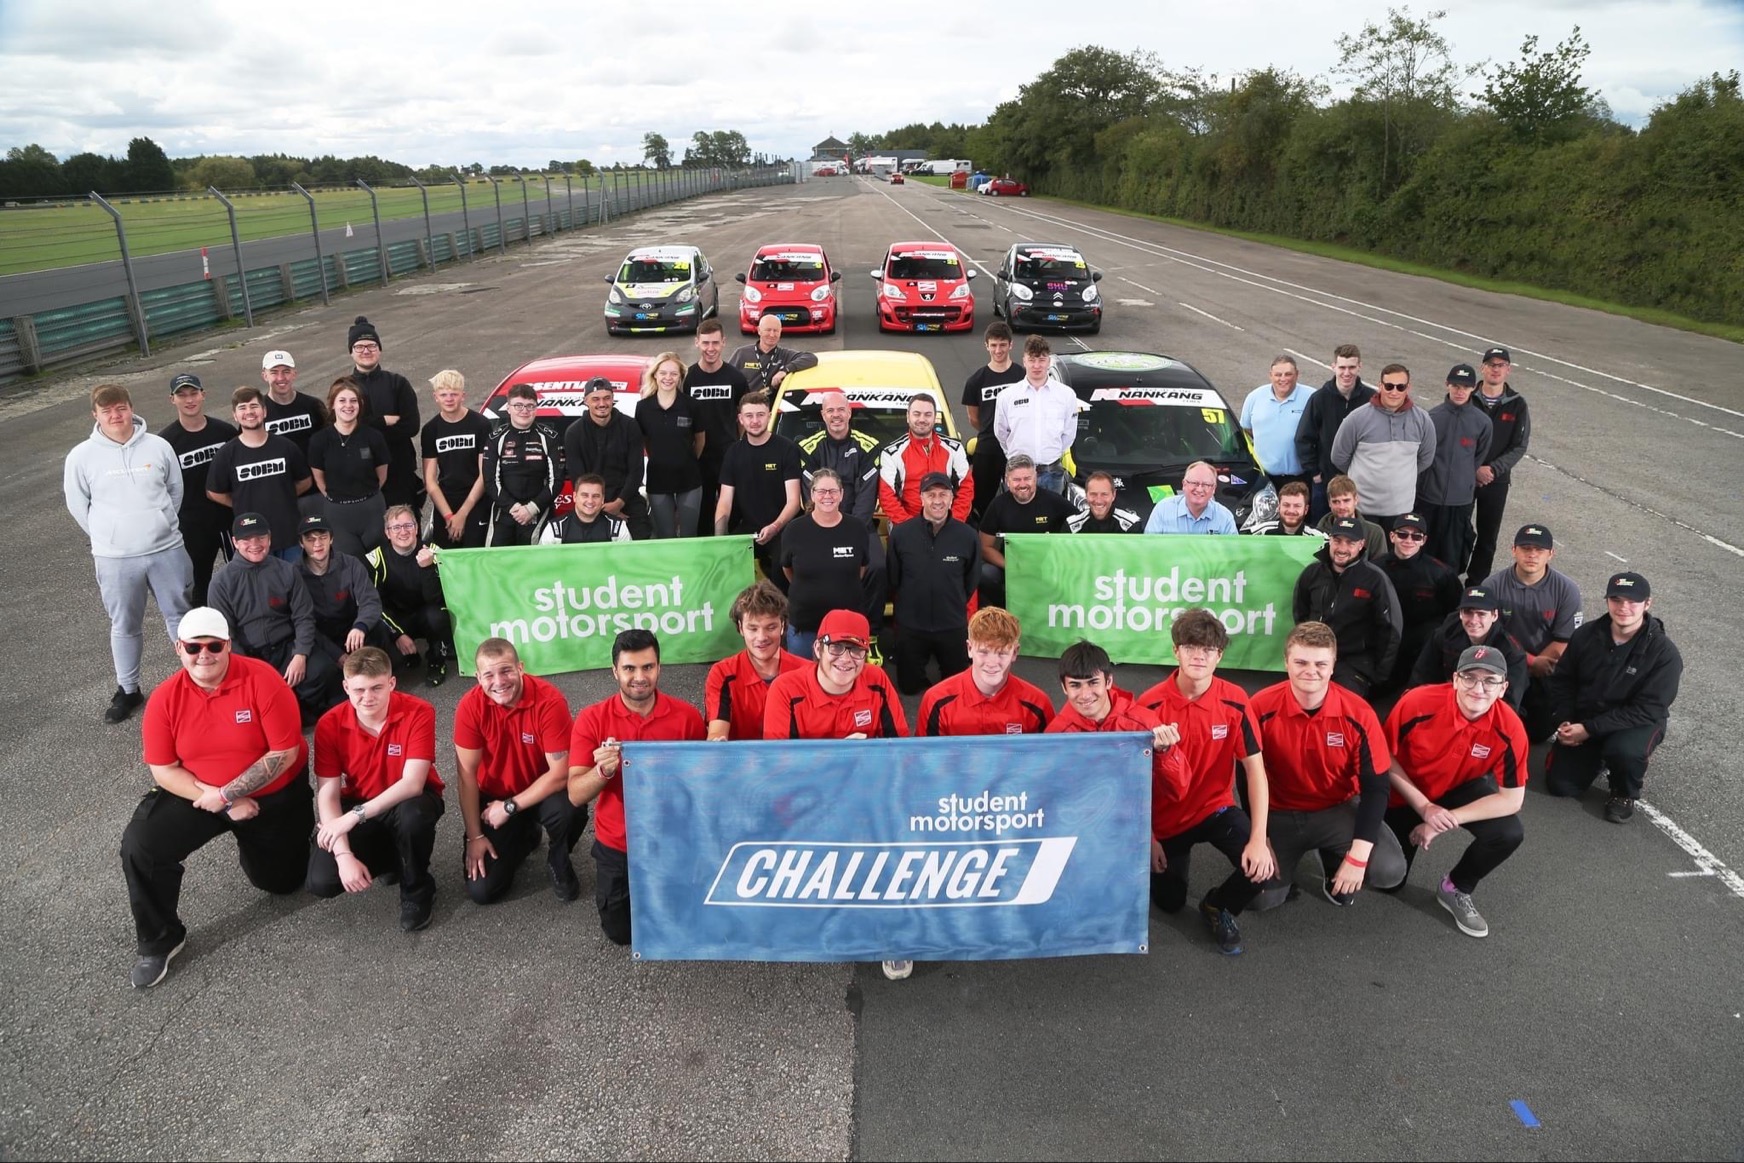 Motorsport students posing with banners by racing cars